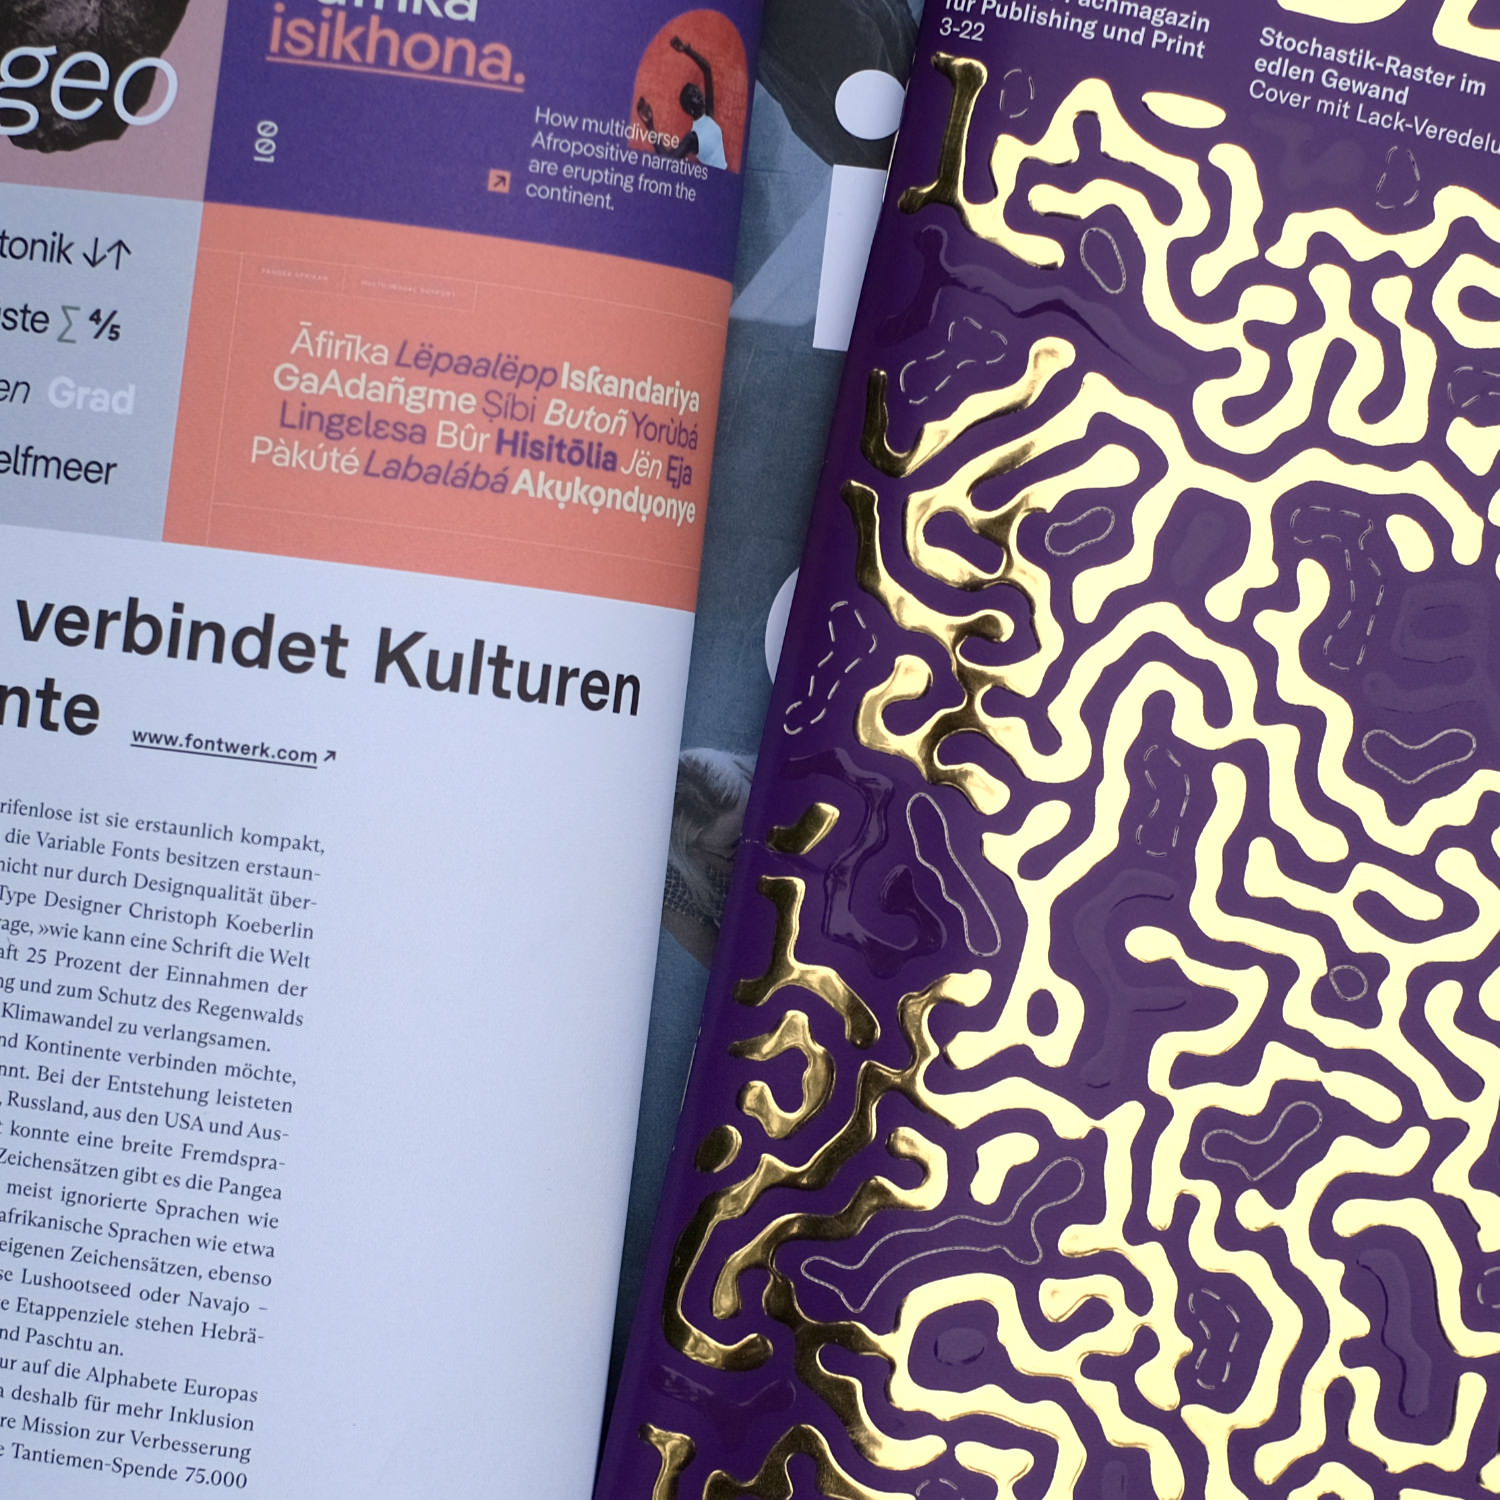 Publisher Issue 3–22 and Grafikmagazin Issue 3.22